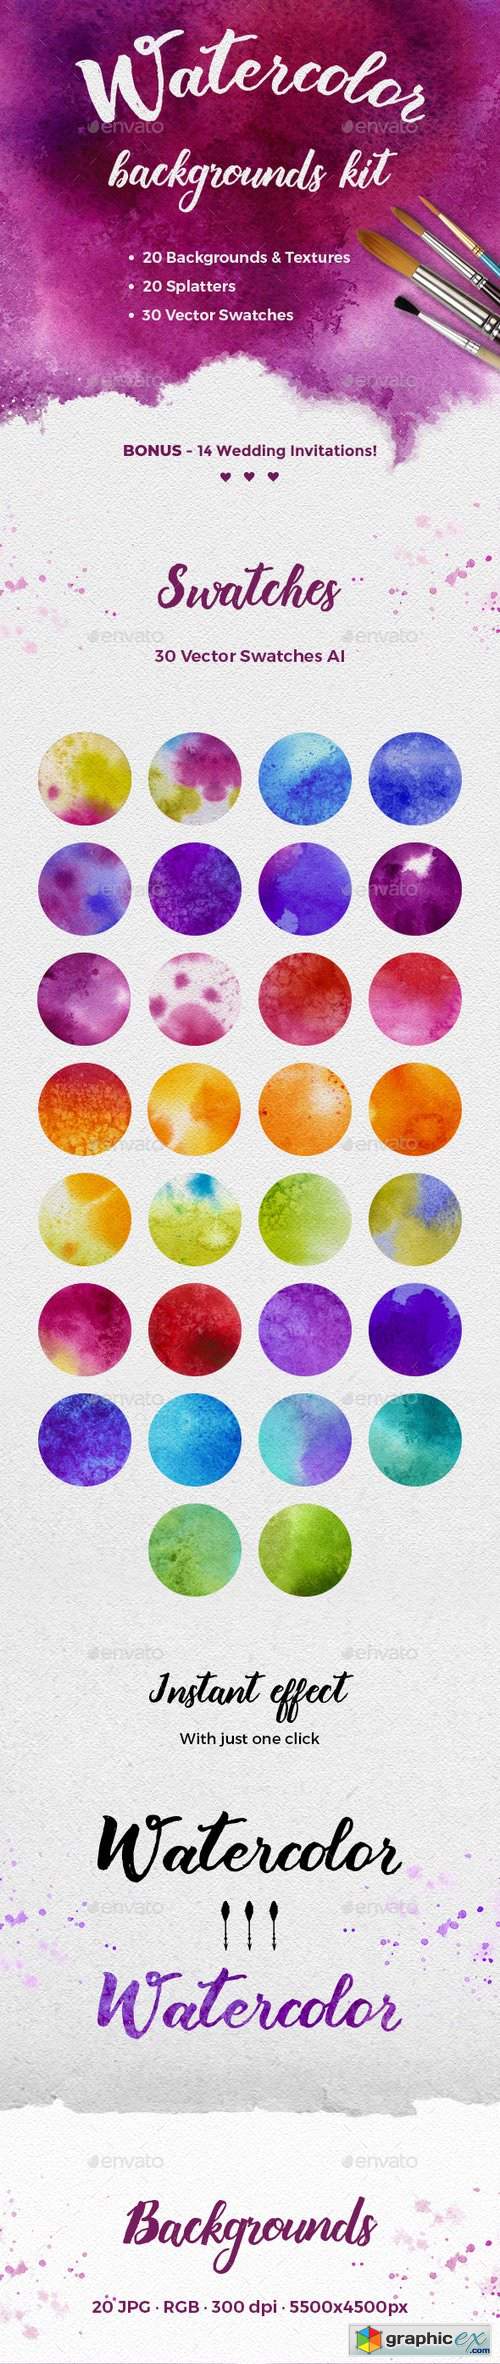 Watercolor Backgrounds Kit